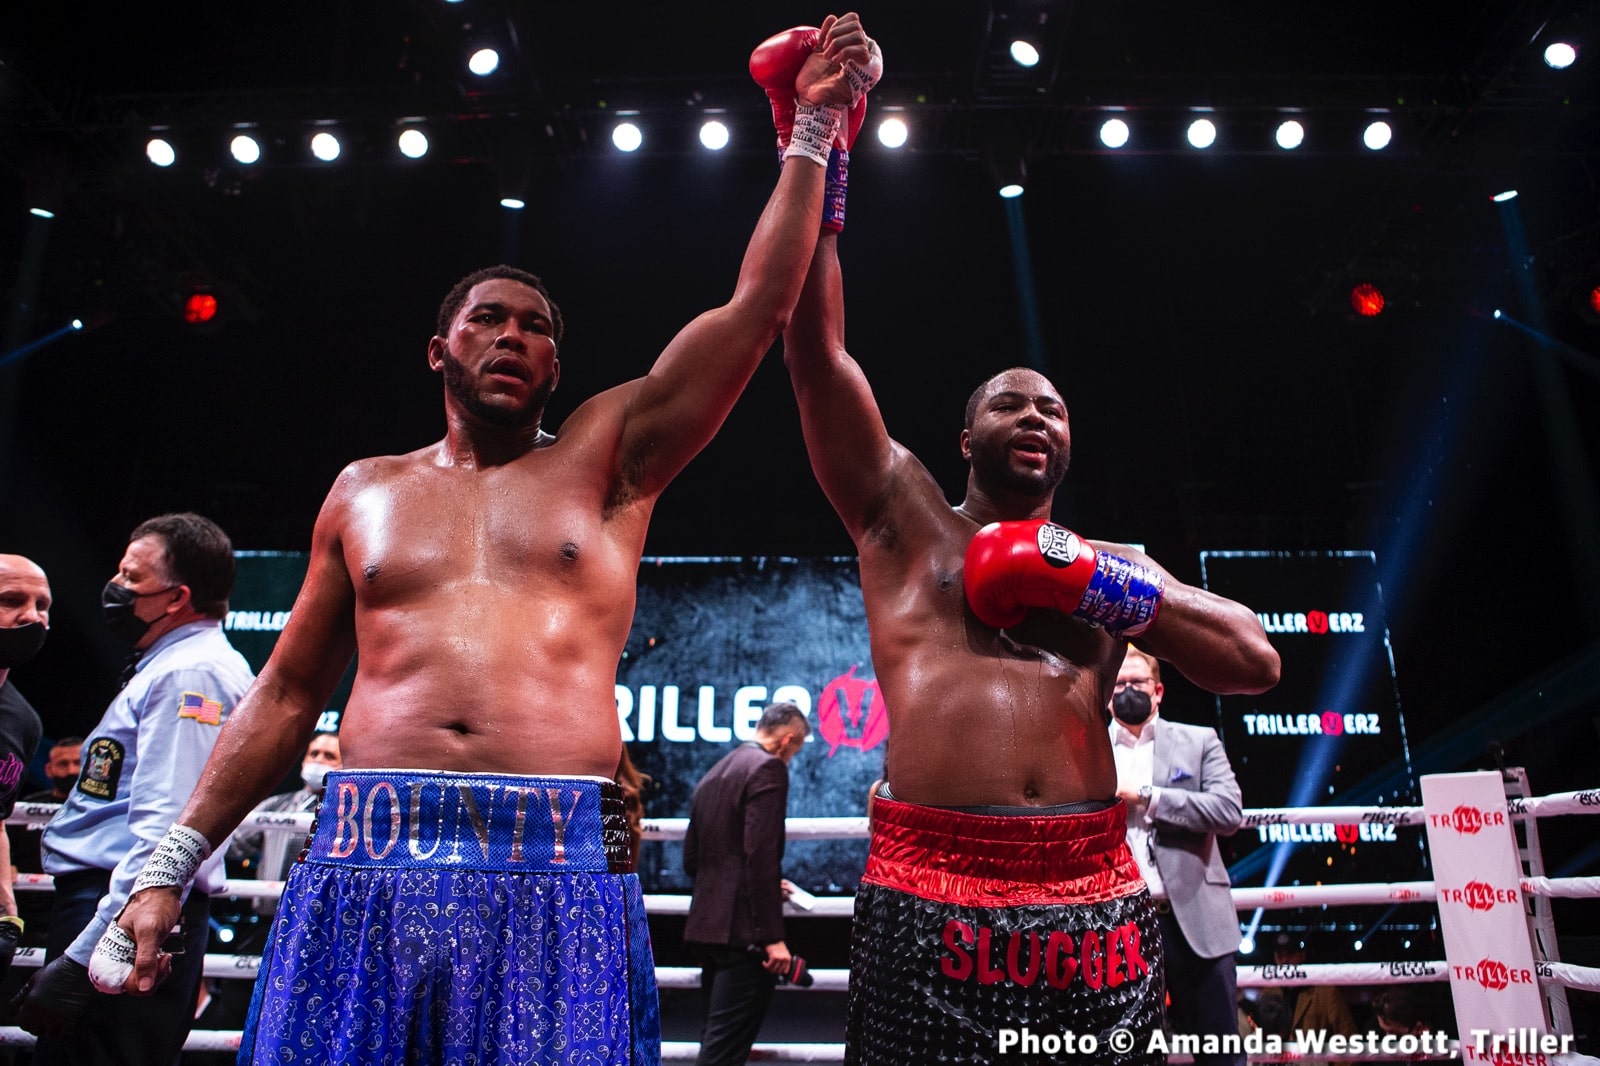 Cassius Chaney, Jerry Forrest, Michael Hunter, Trey Lippe-Morrison boxing image / photo